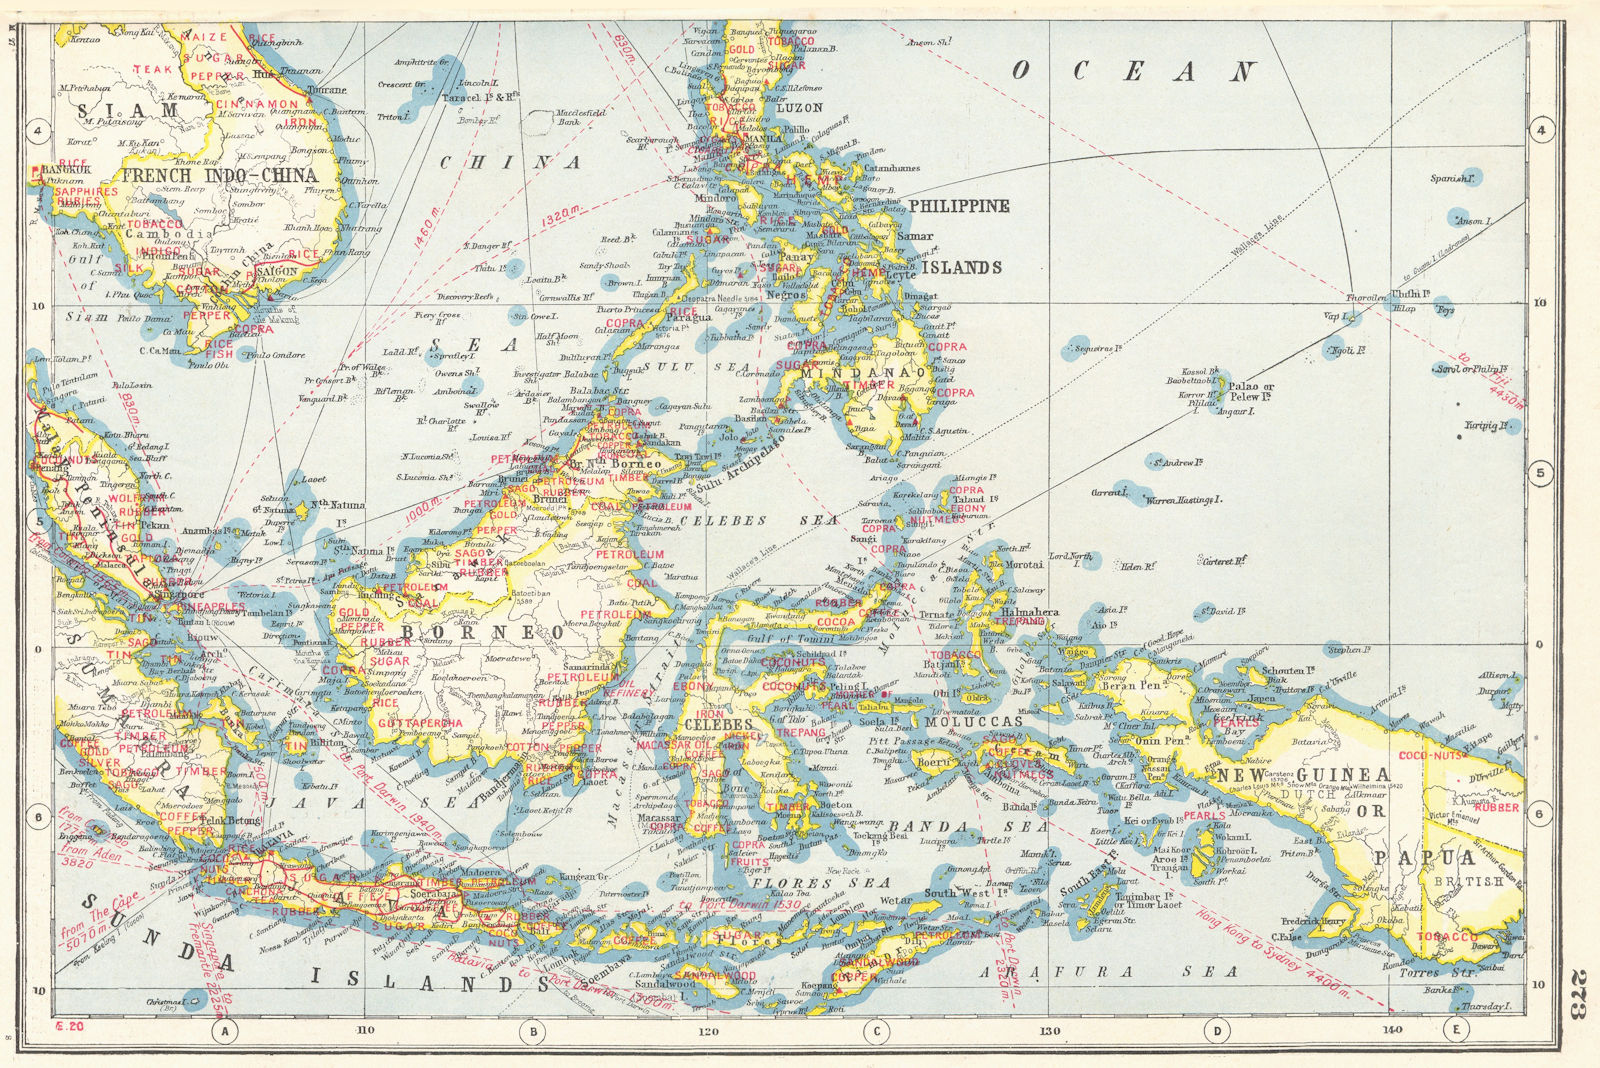 INDONESIA PHILIPPINES. South East Asia.Industrial showing key products 1920 map